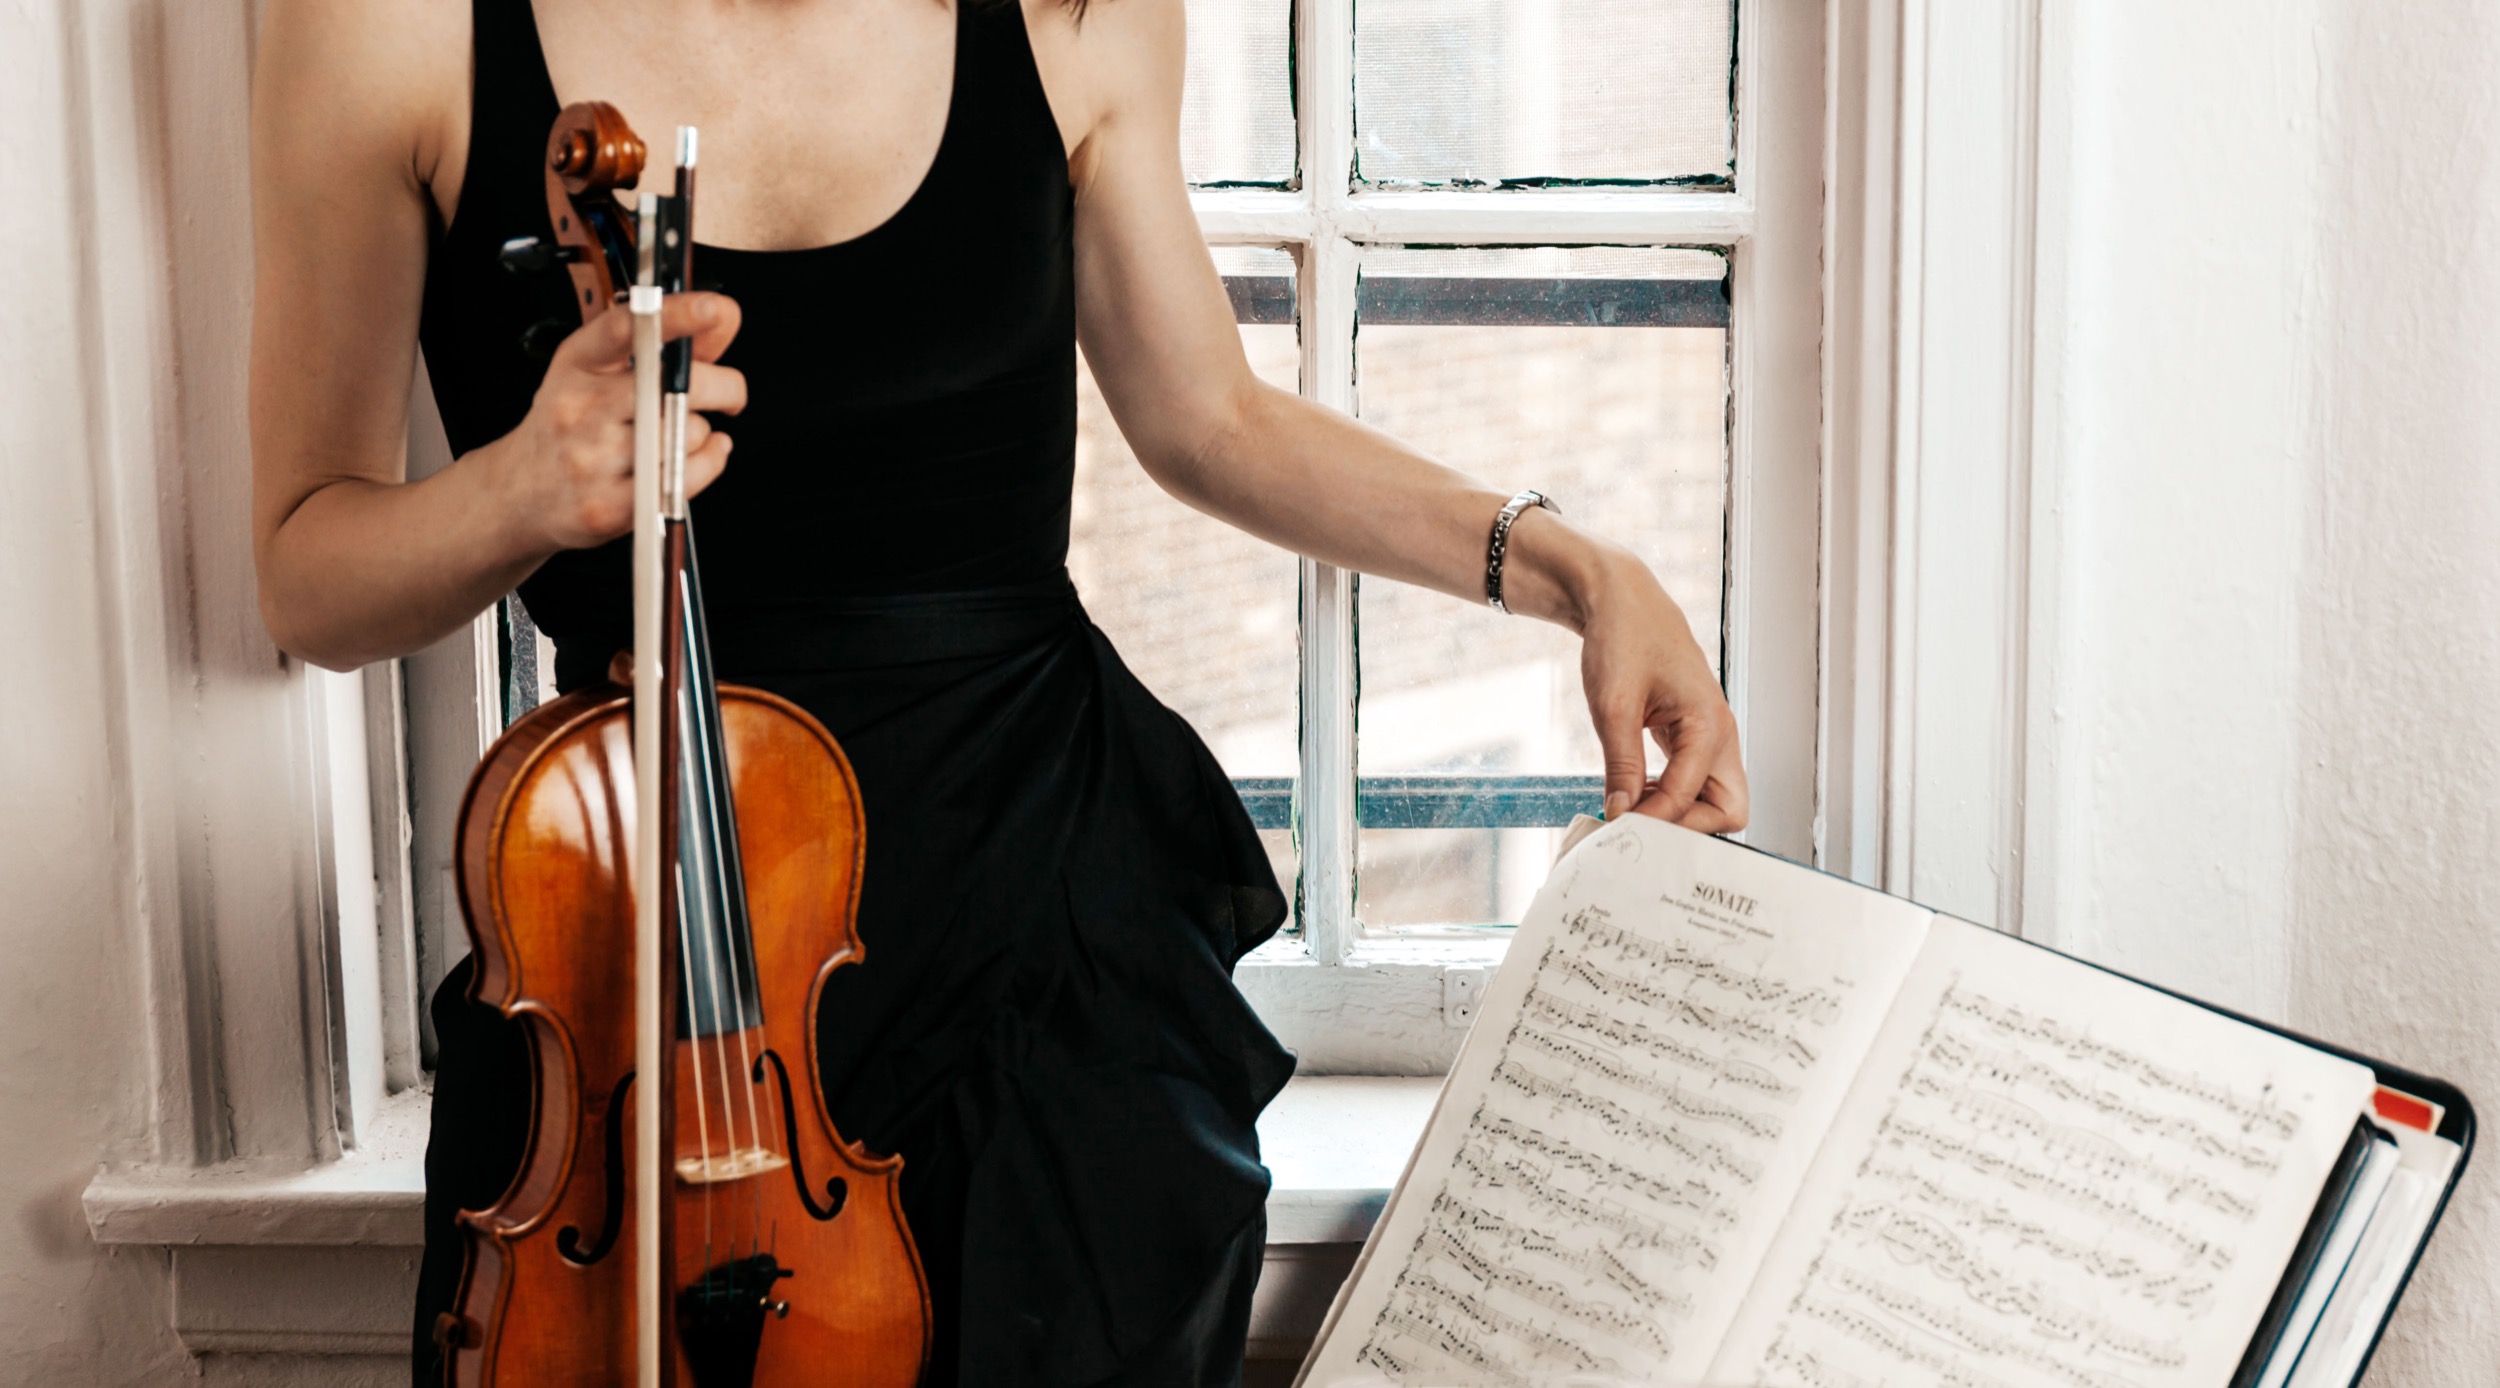 thin white woman in black dress holding her violin in front of an old painted white windowsill and preparing sheet music on a stand